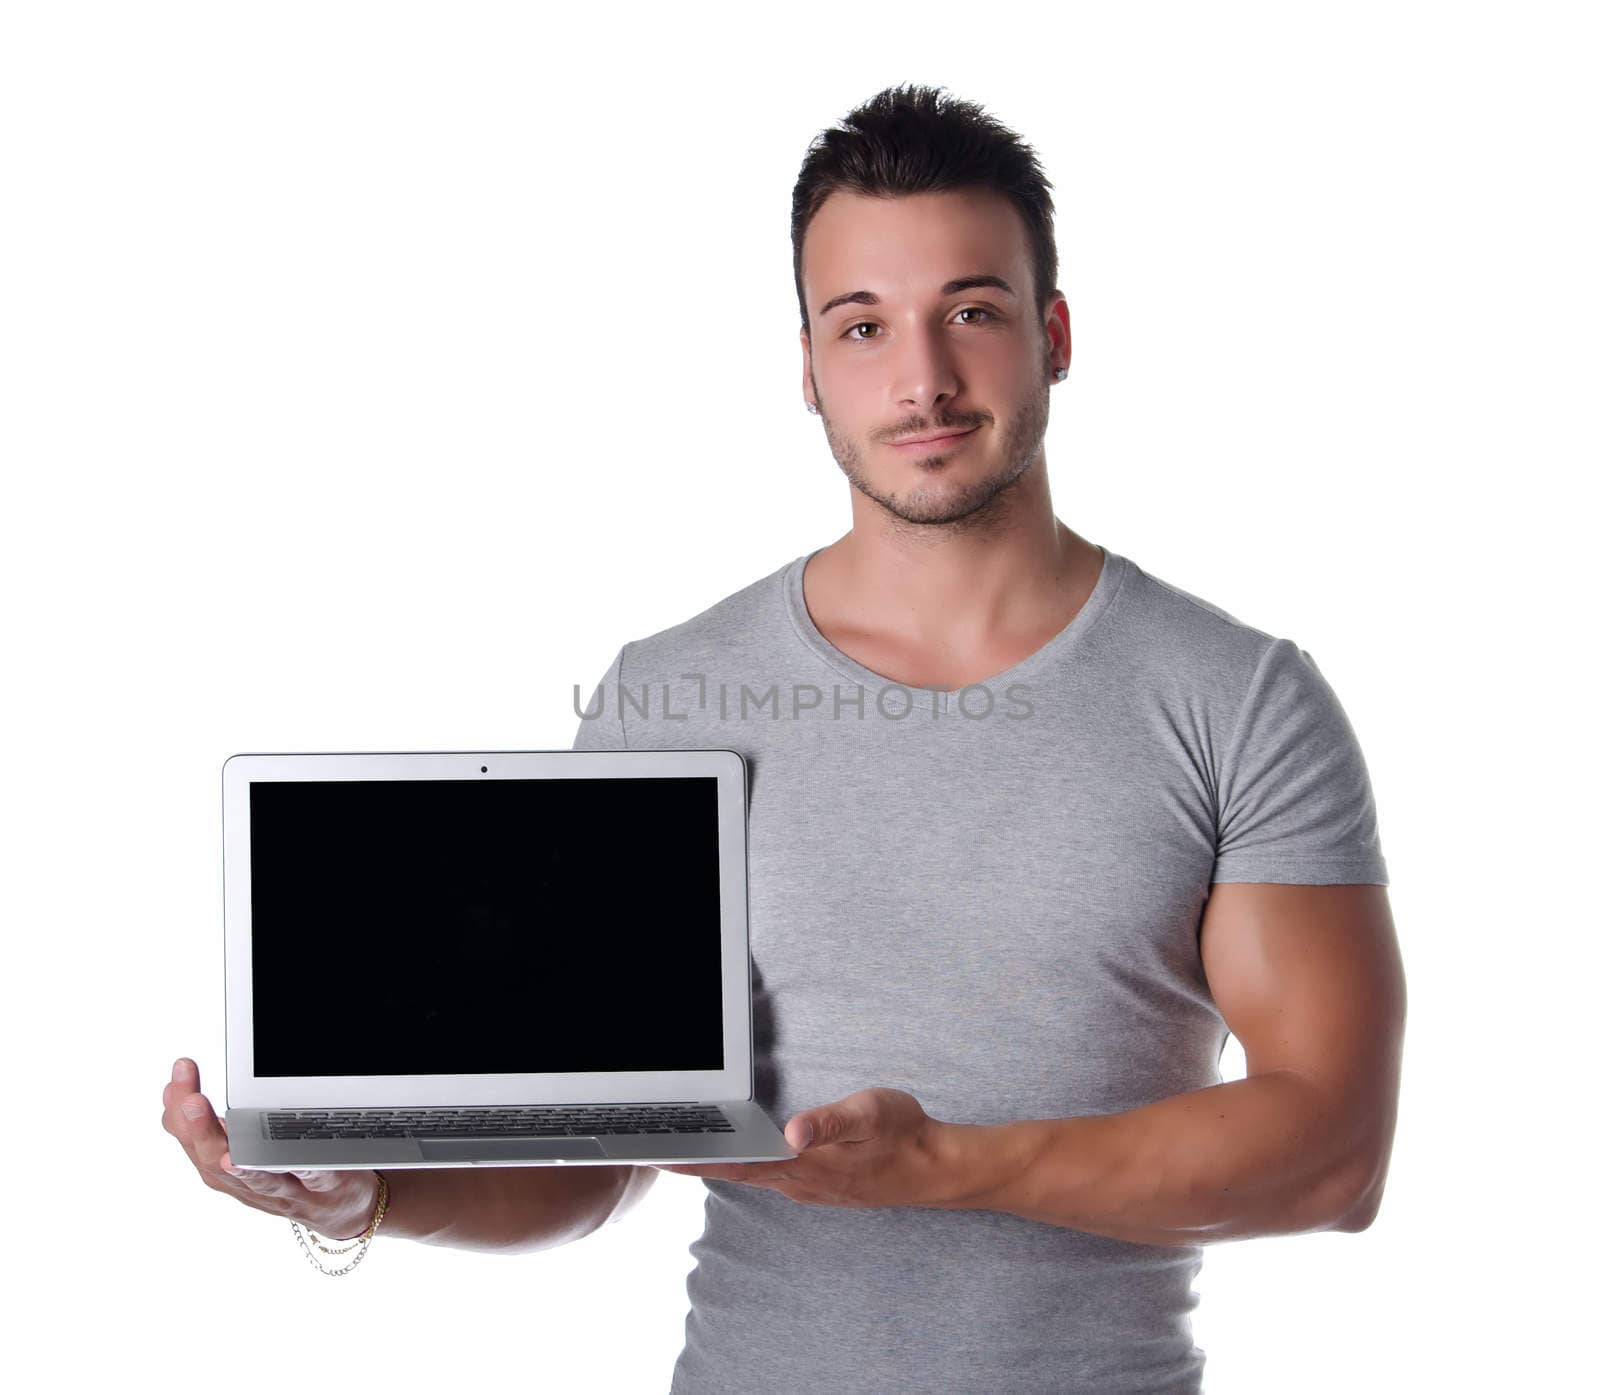 Attractive young man holding and showing laptop computer with blank screen, isolated on white